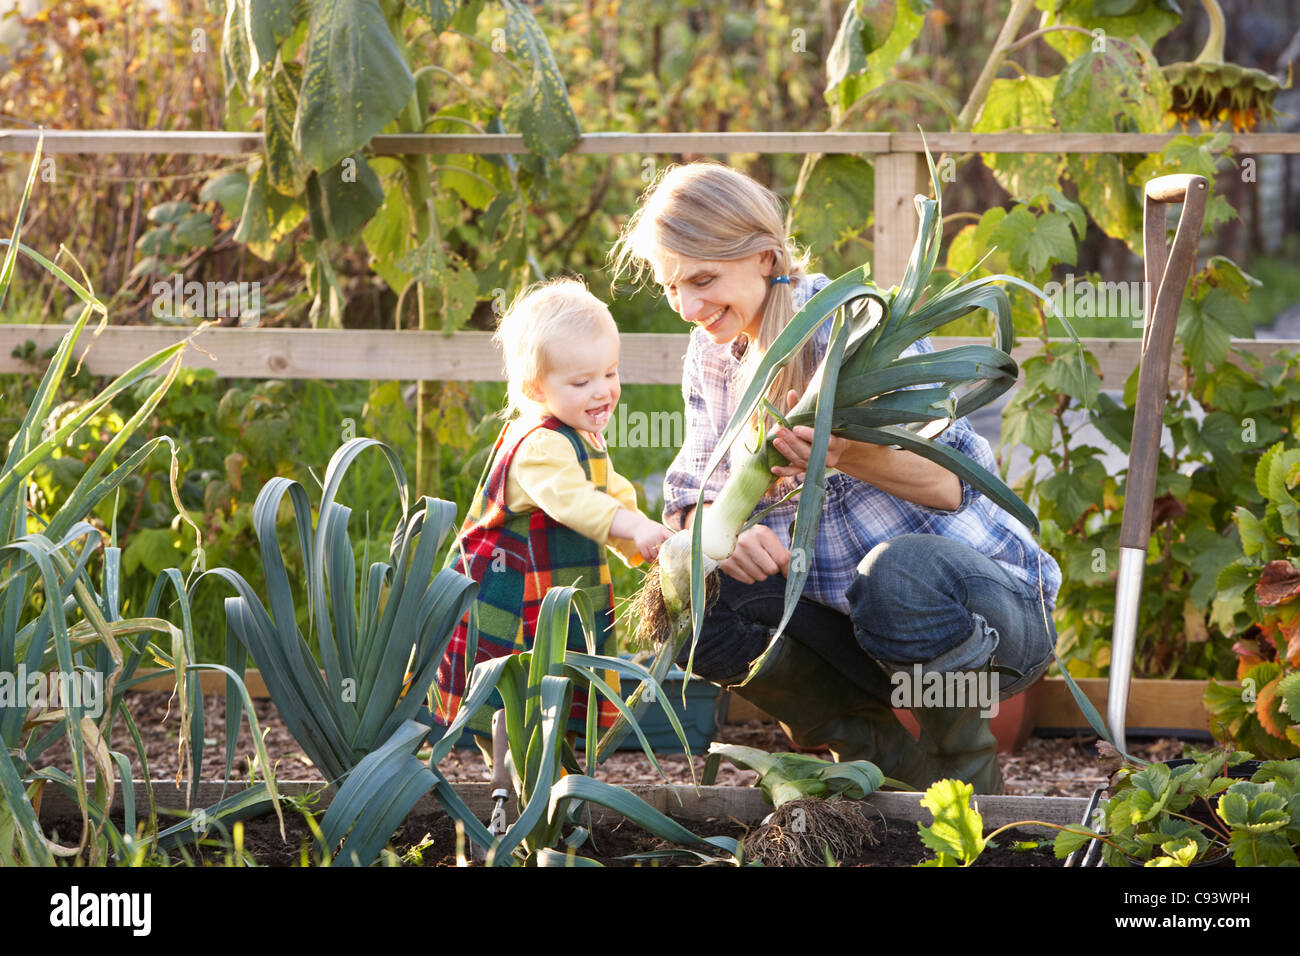 Woman working on allotment with child Stock Photo